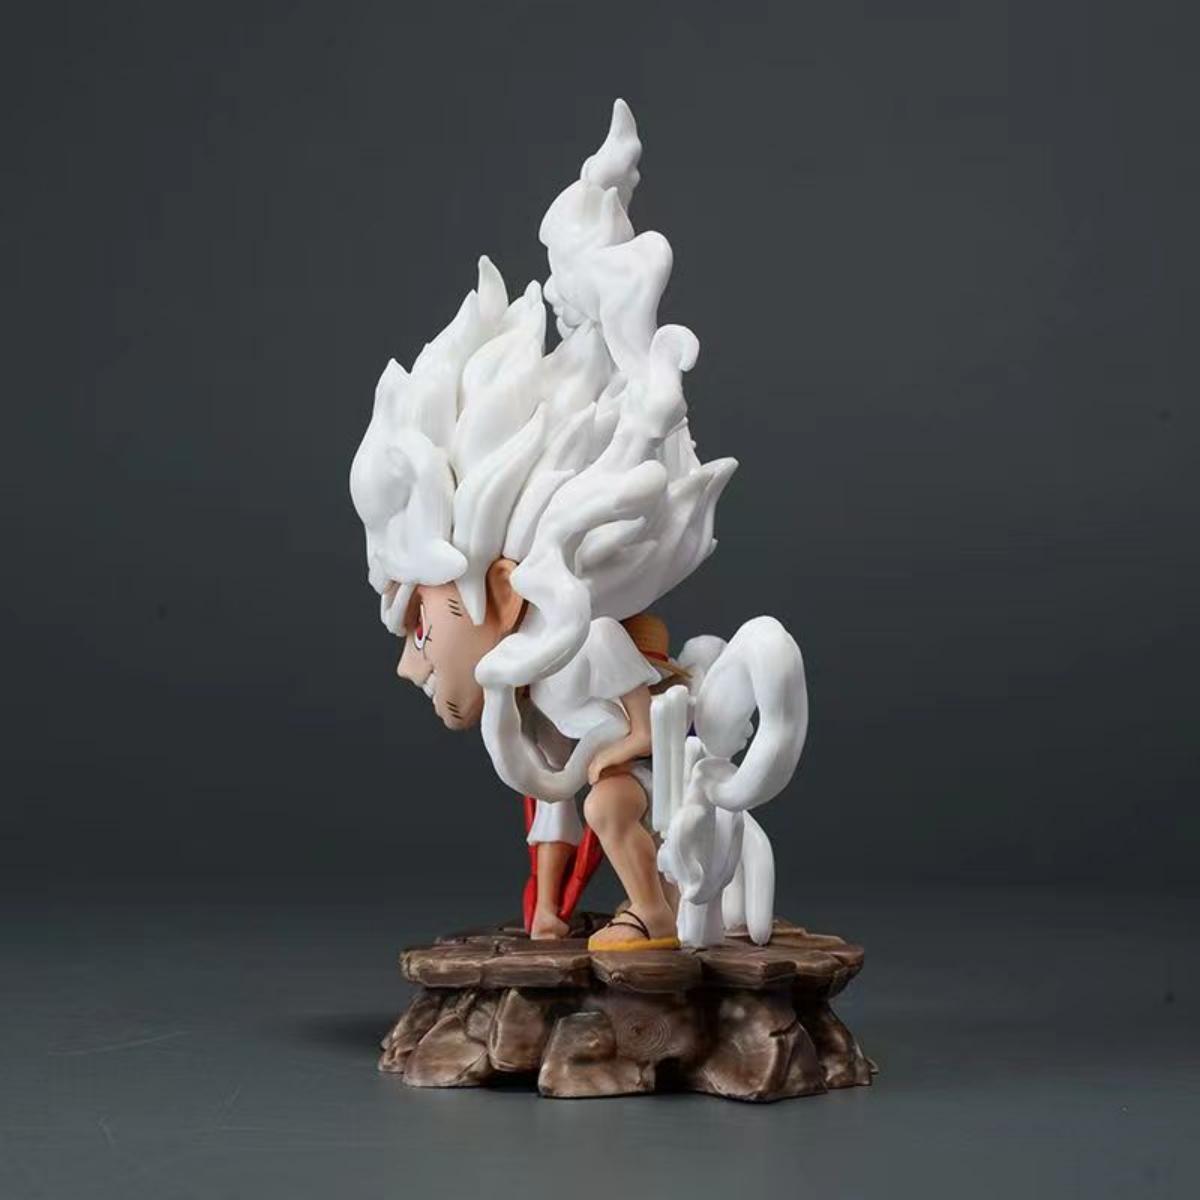 An anime hand with a high degree of Luffy action, perfect for decorating your desk or bookshelf.